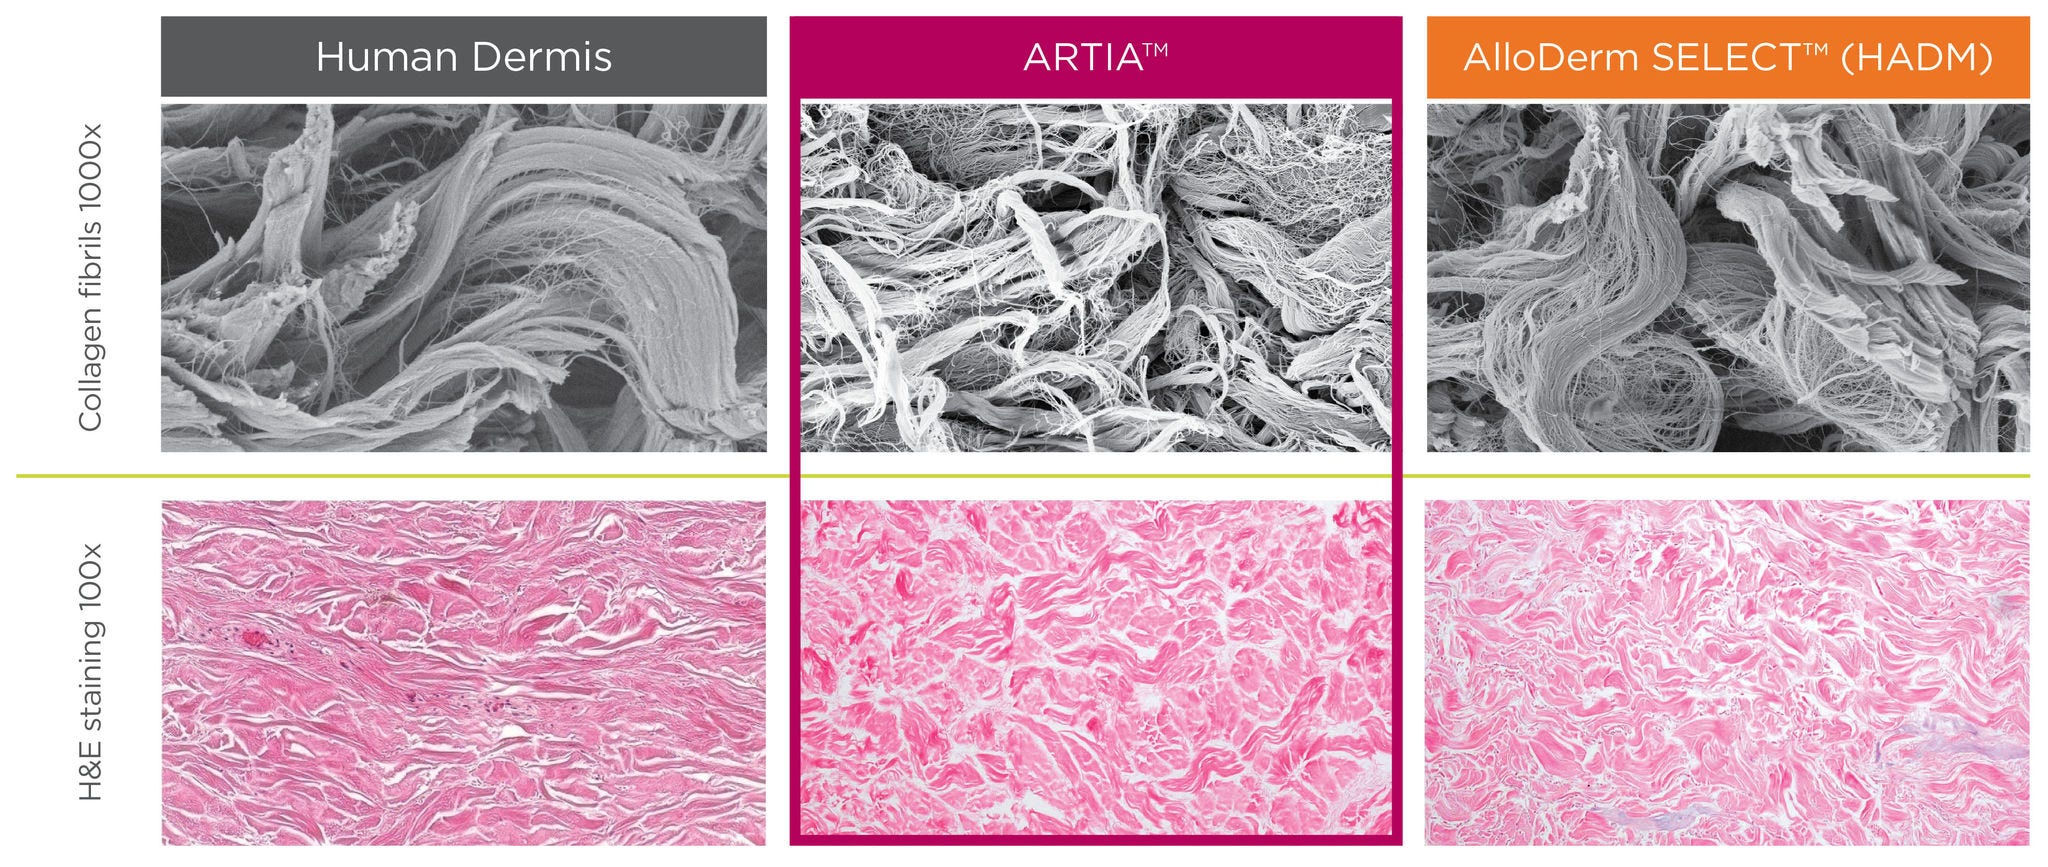  Histological and scanning electron microscope images of human dermis, ARTIA™, and AlloDerm™ tissue matrix at 200x magnification and 1000x magnification, respectively.  